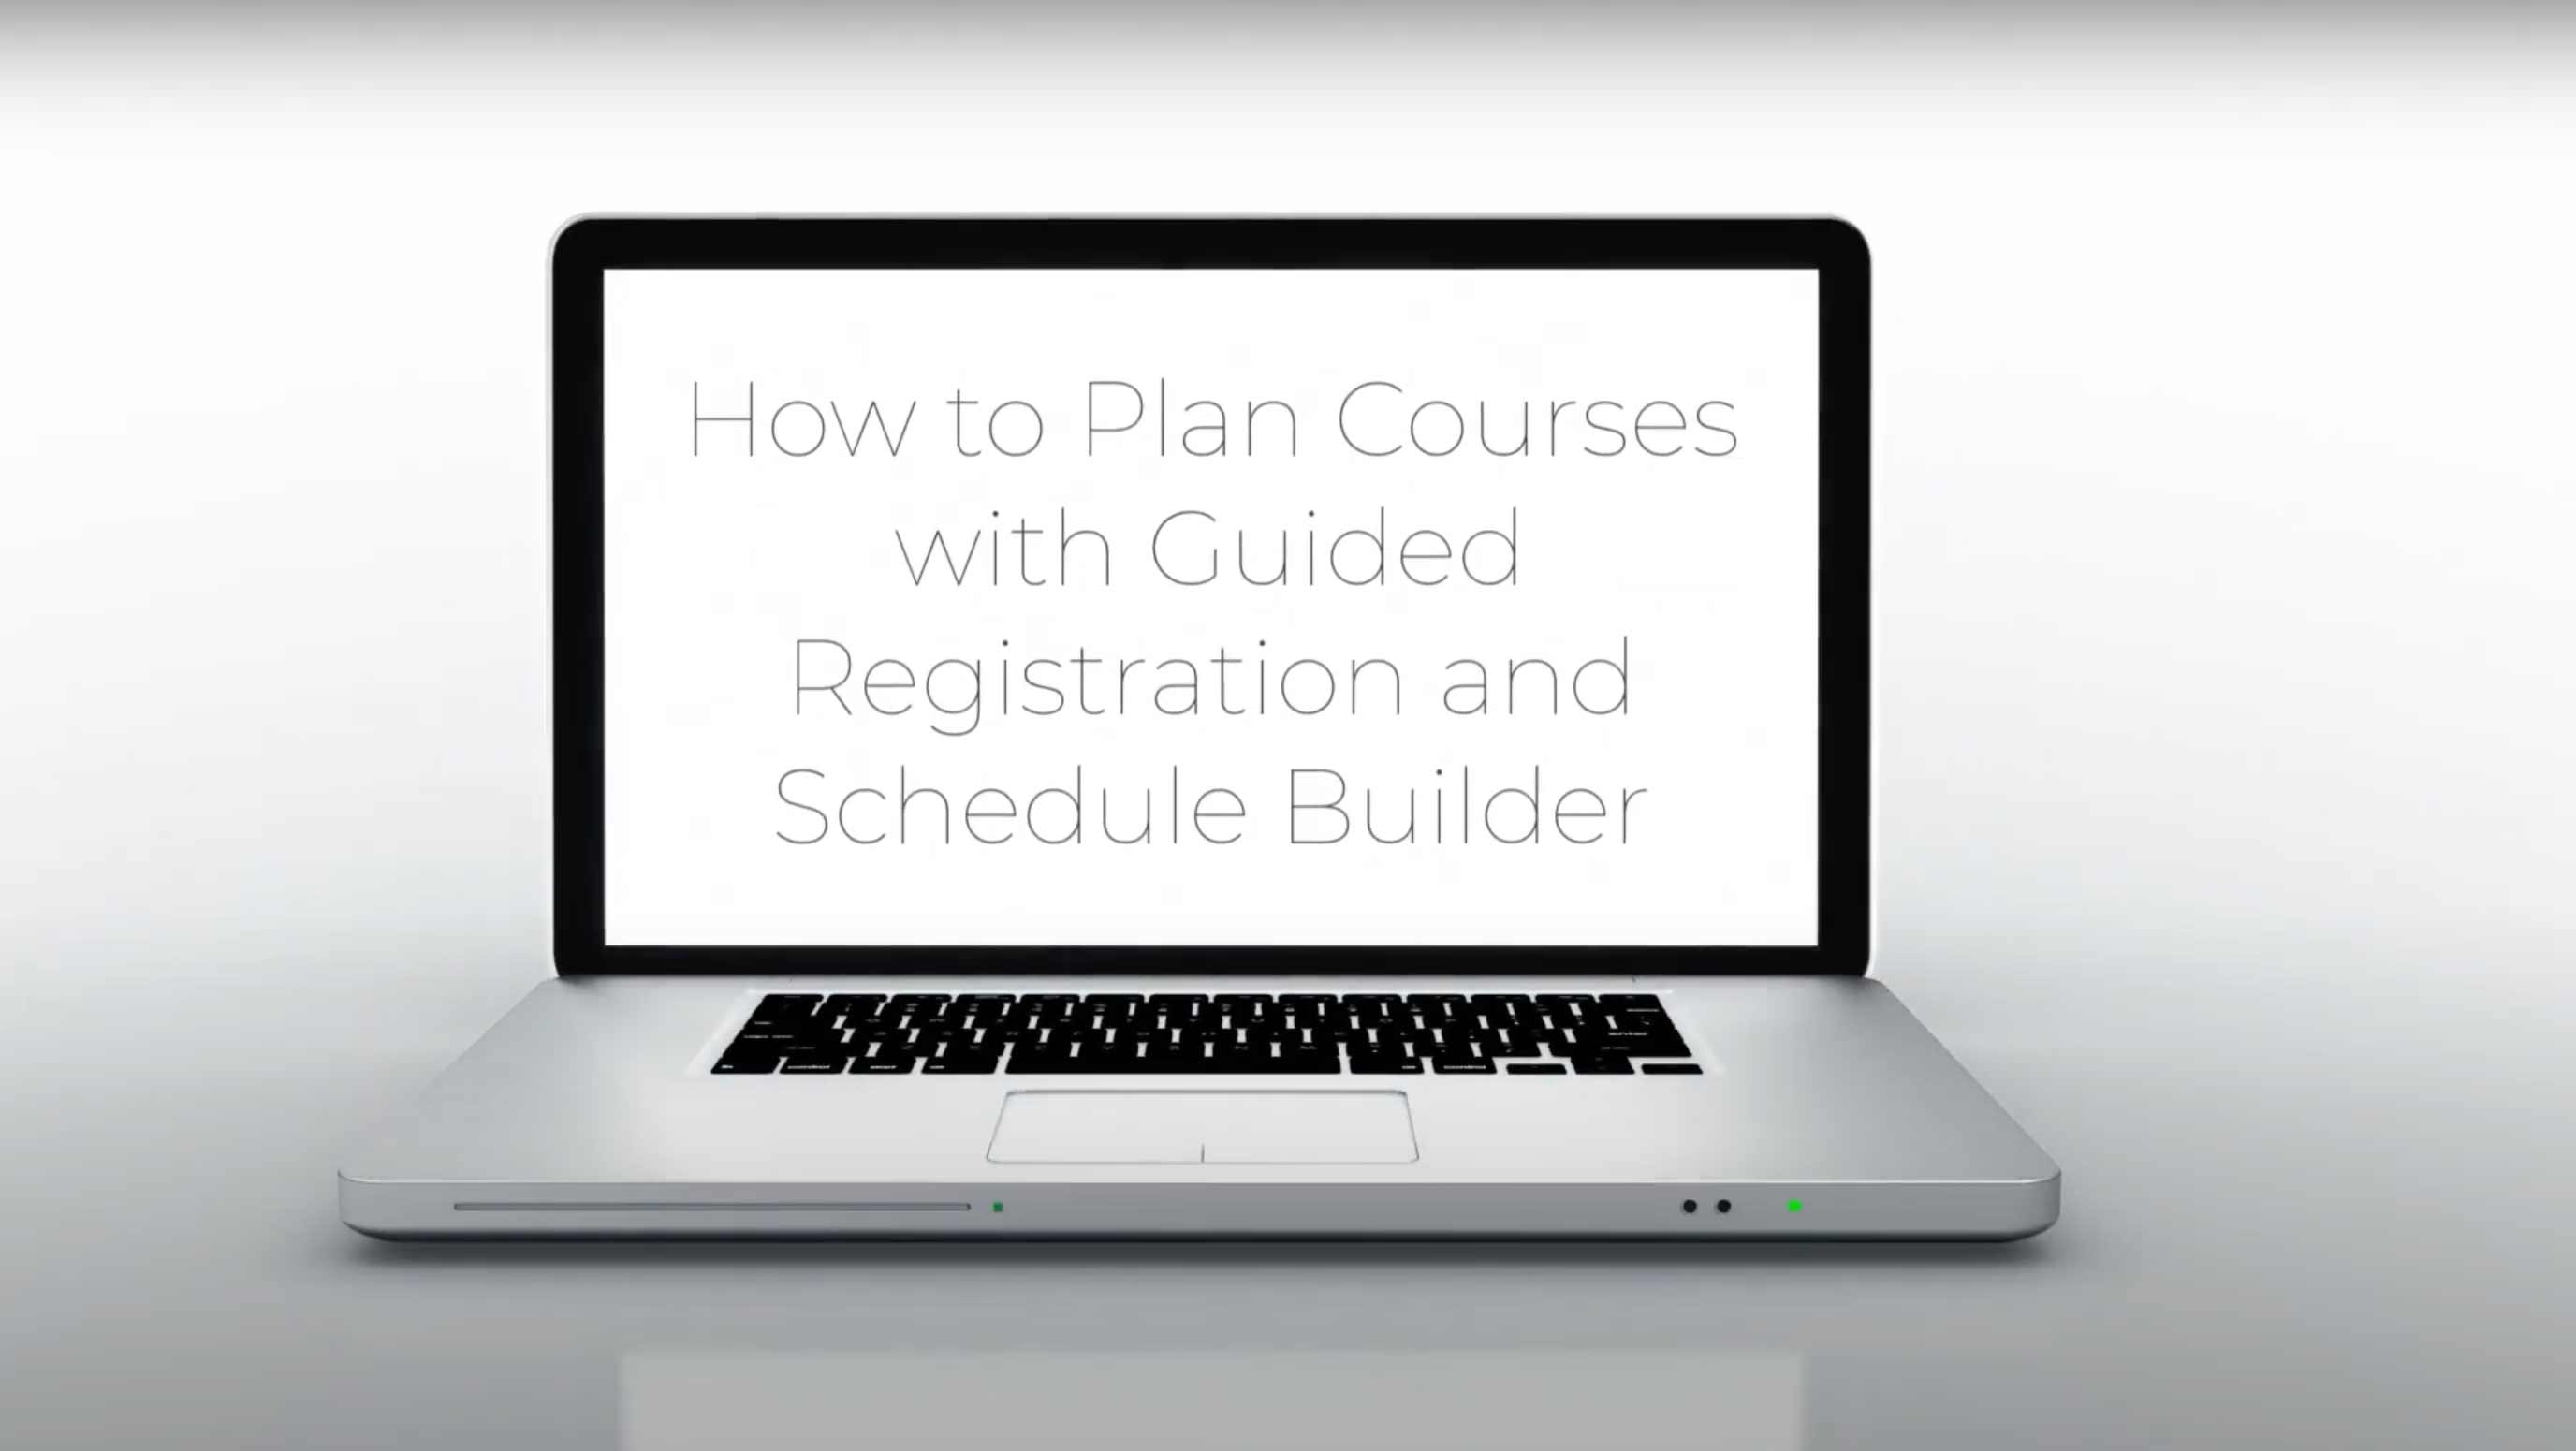 How to Plan Courses with Guided Registration and Schedule Builder: